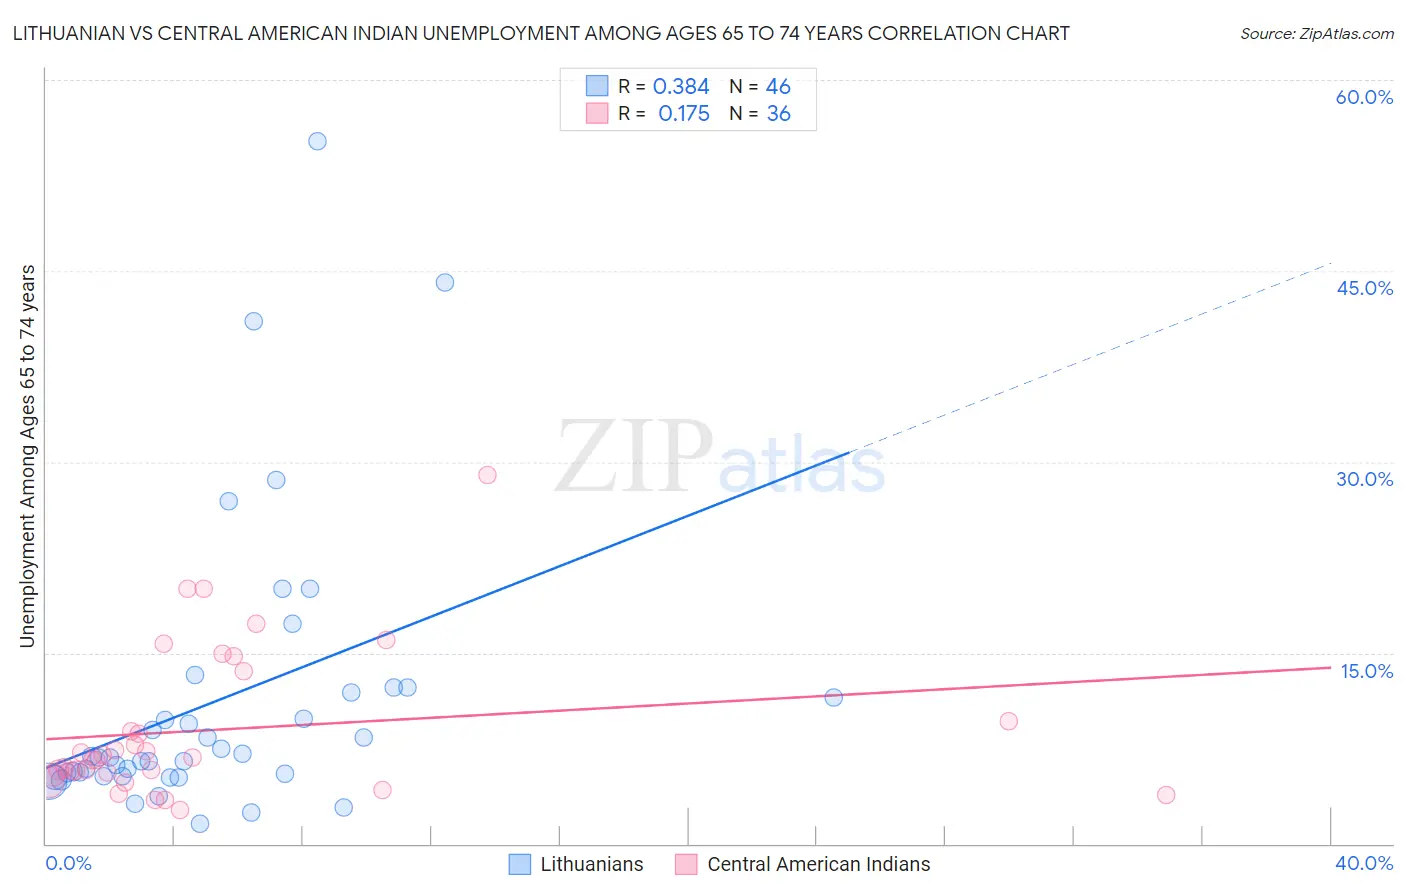 Lithuanian vs Central American Indian Unemployment Among Ages 65 to 74 years